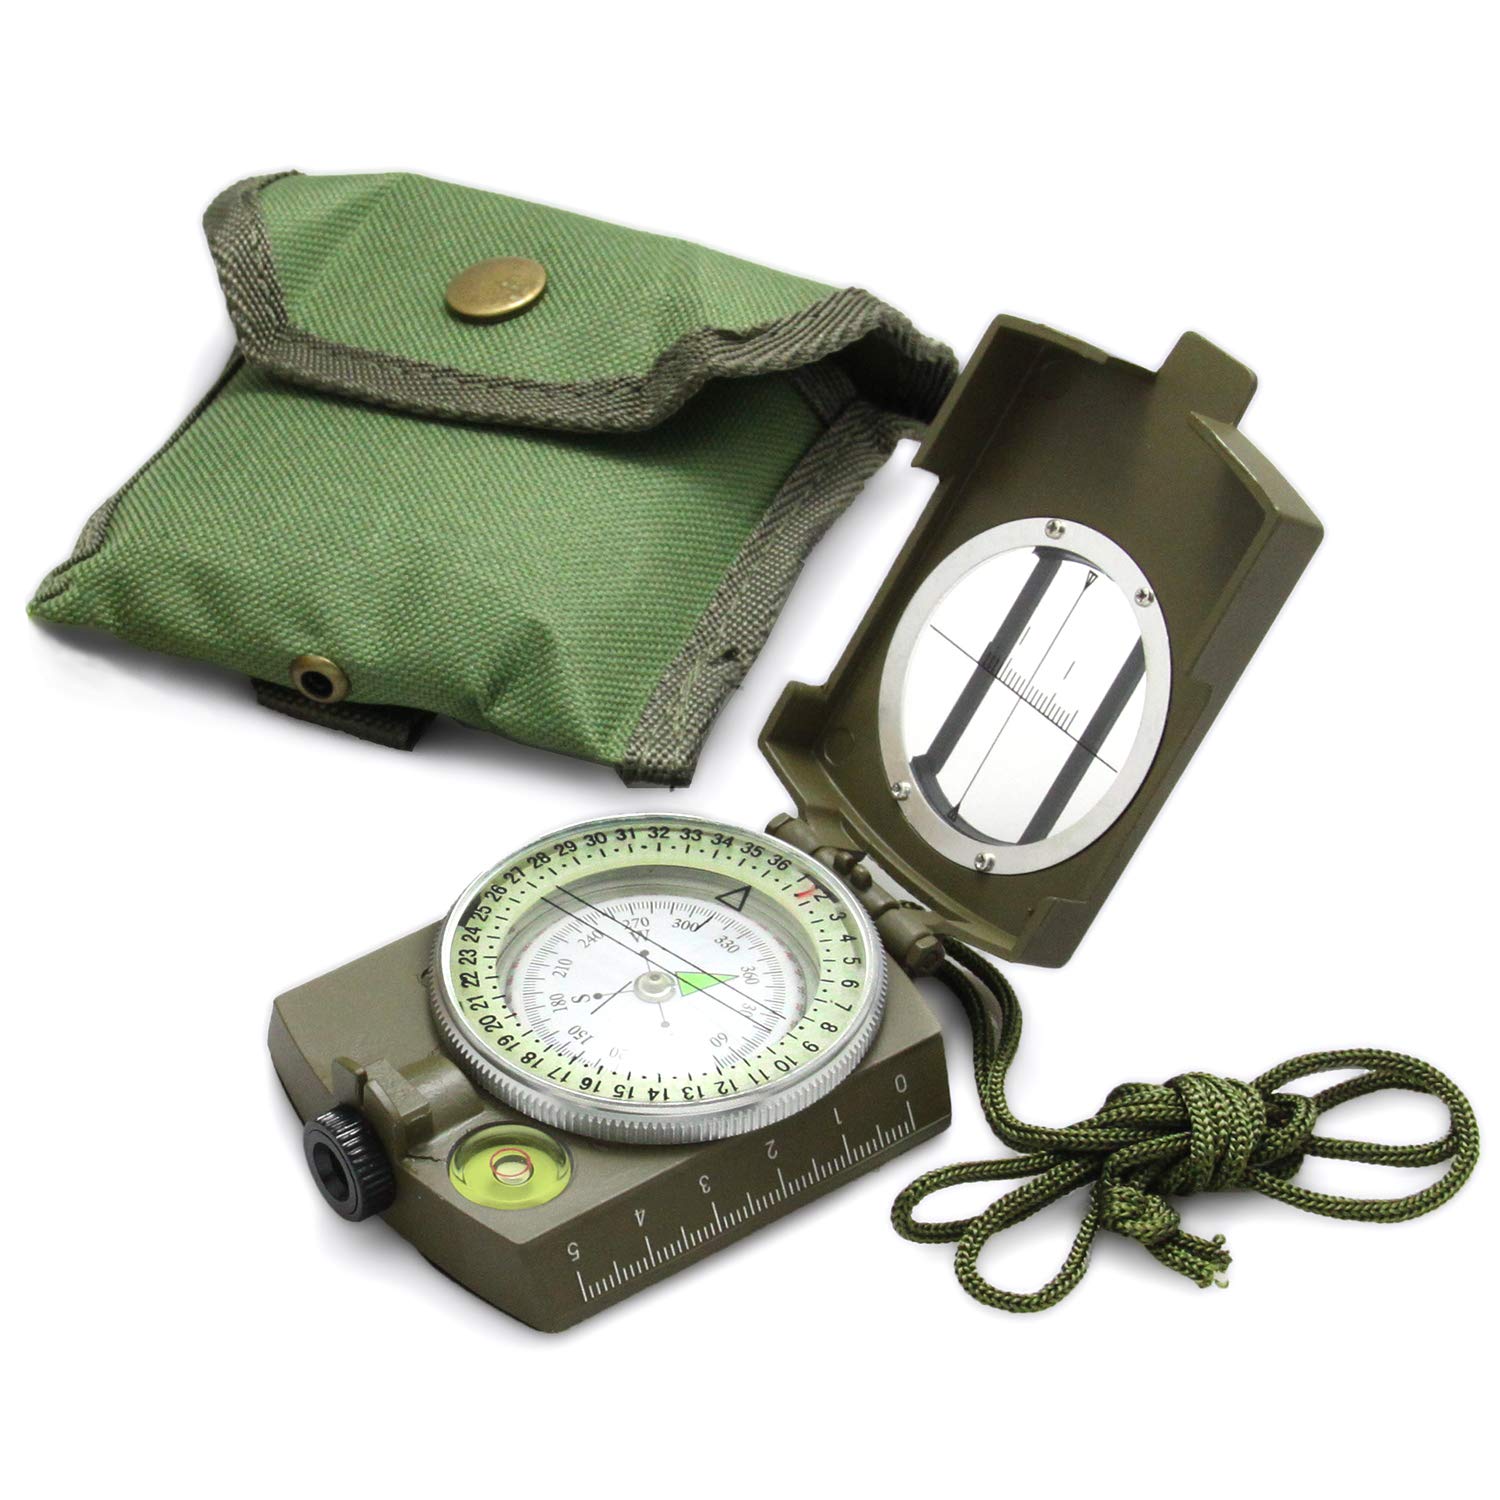 Eyeskey Multifunctional Tactical Survival Military Compass With Lanyard &  Pouch | Waterproof & Impact Resistant | Lensatic Sighting Compass For  Hiking Ek1001 Green Compass